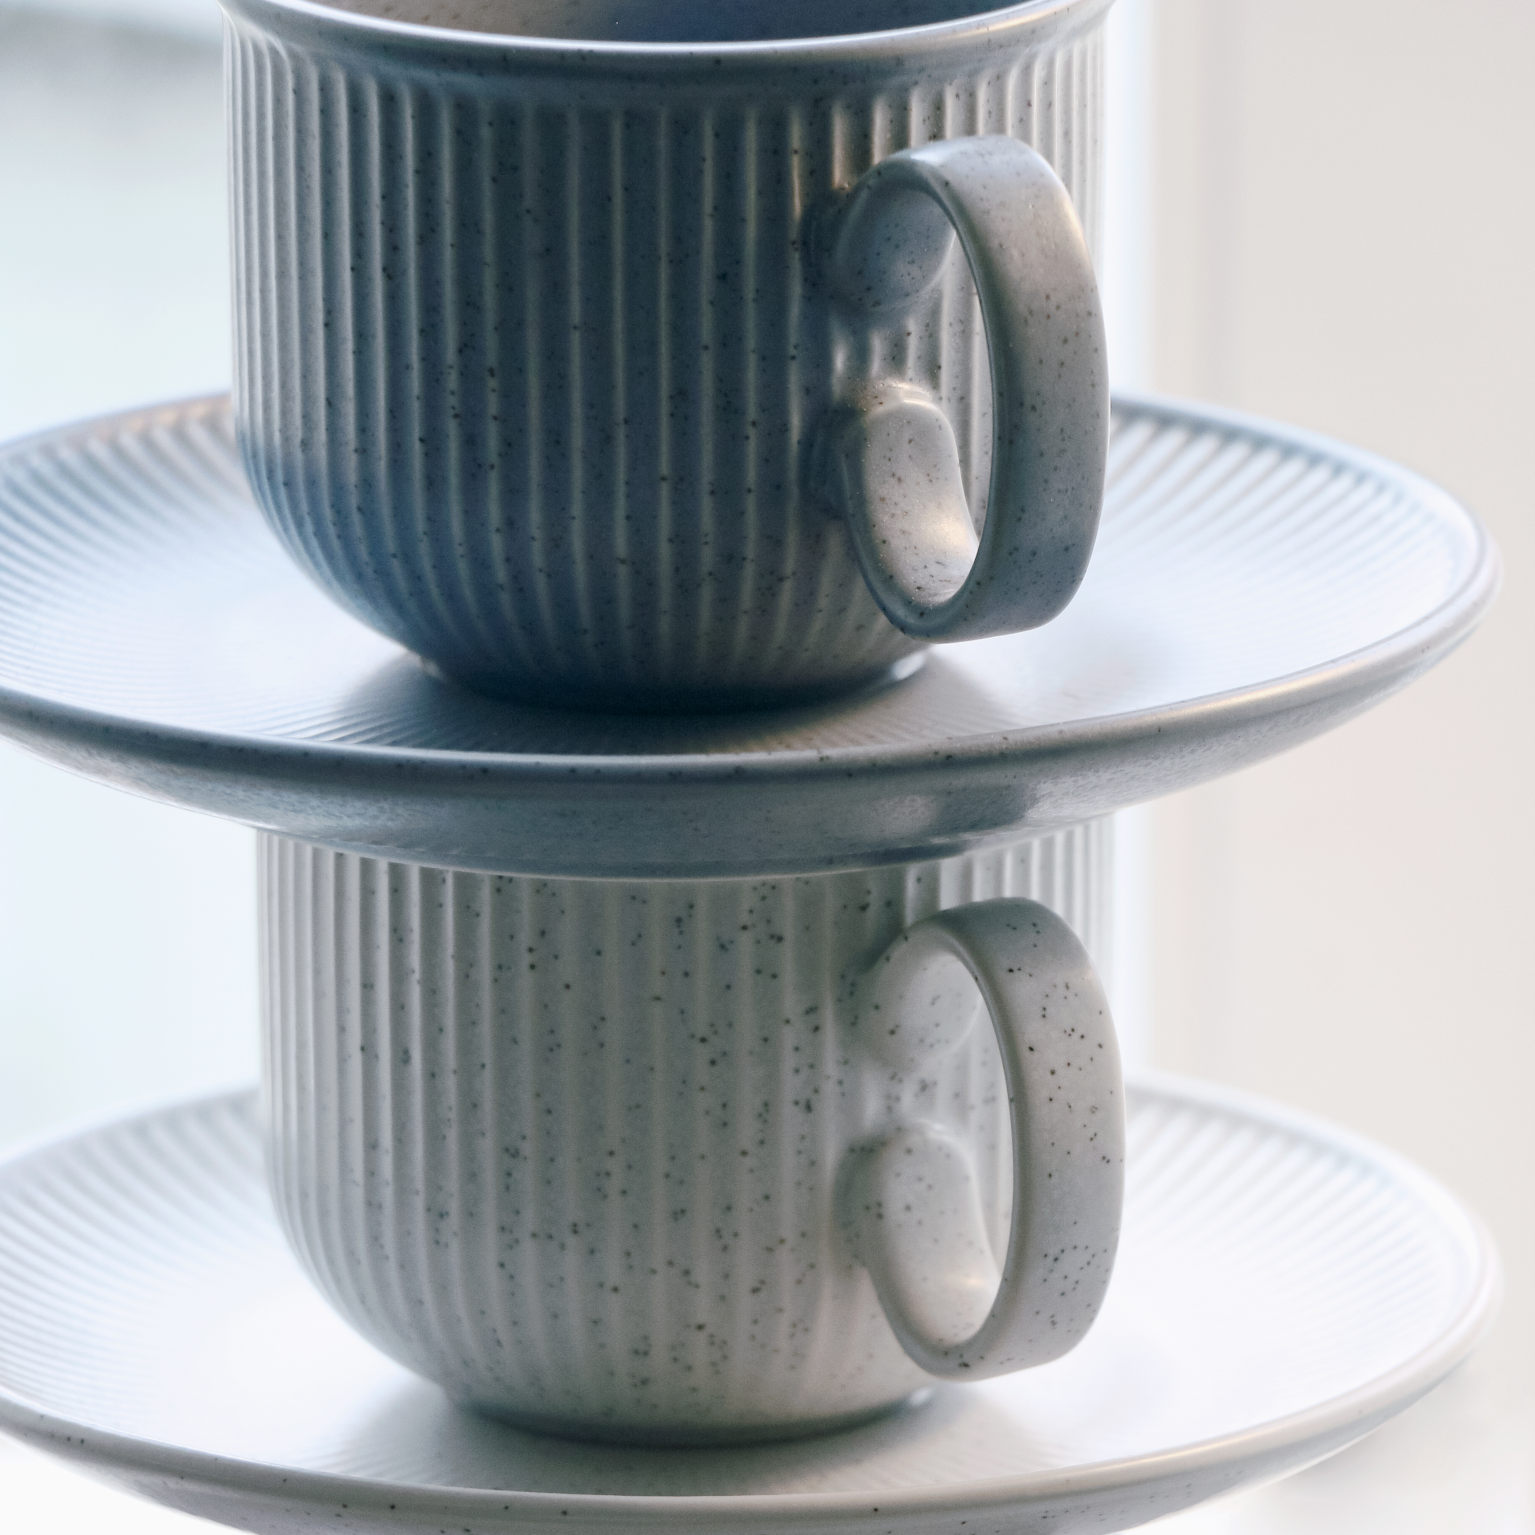 Thomas Clay cups in blue and light gray